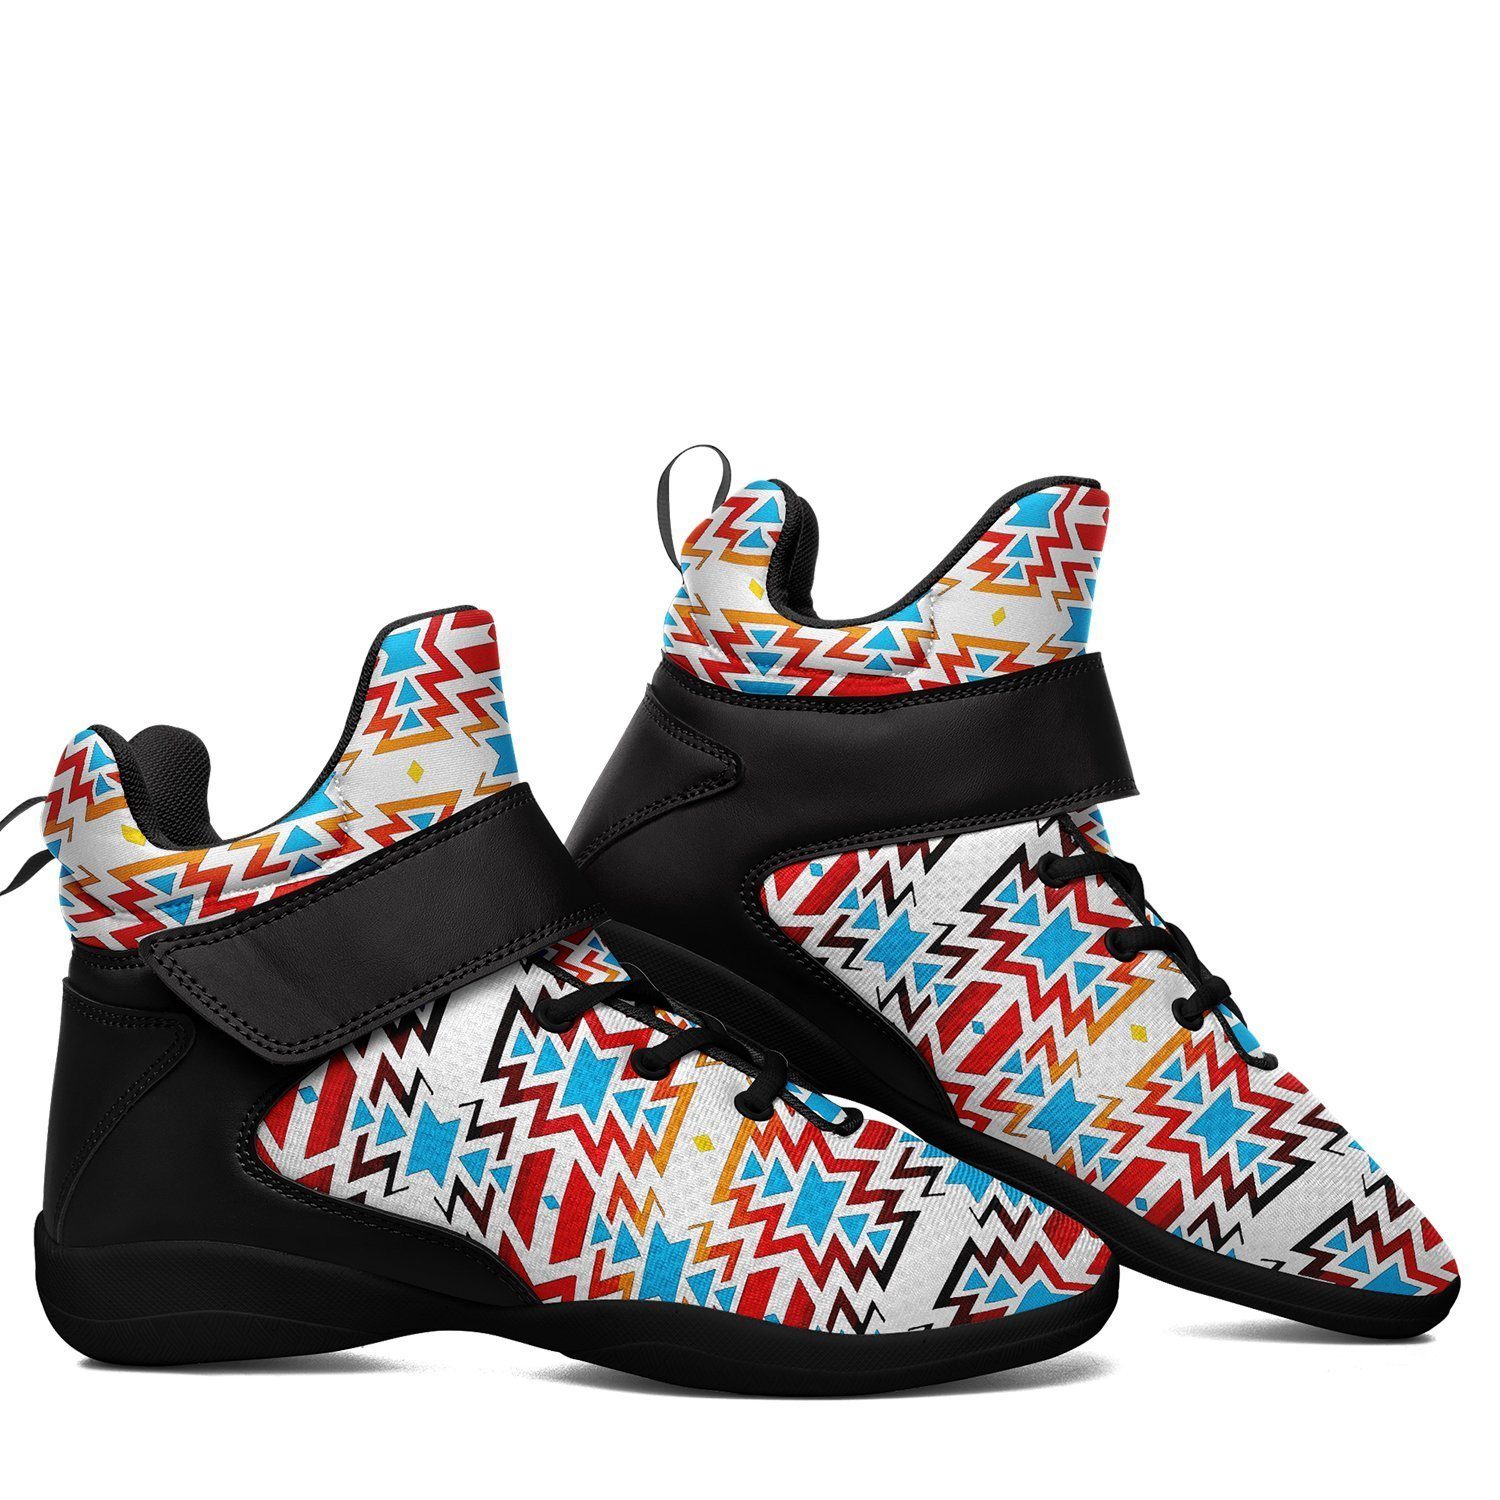 Fire Colors and Sky Ipottaa Basketball / Sport High Top Shoes - Black Sole 49 Dzine 